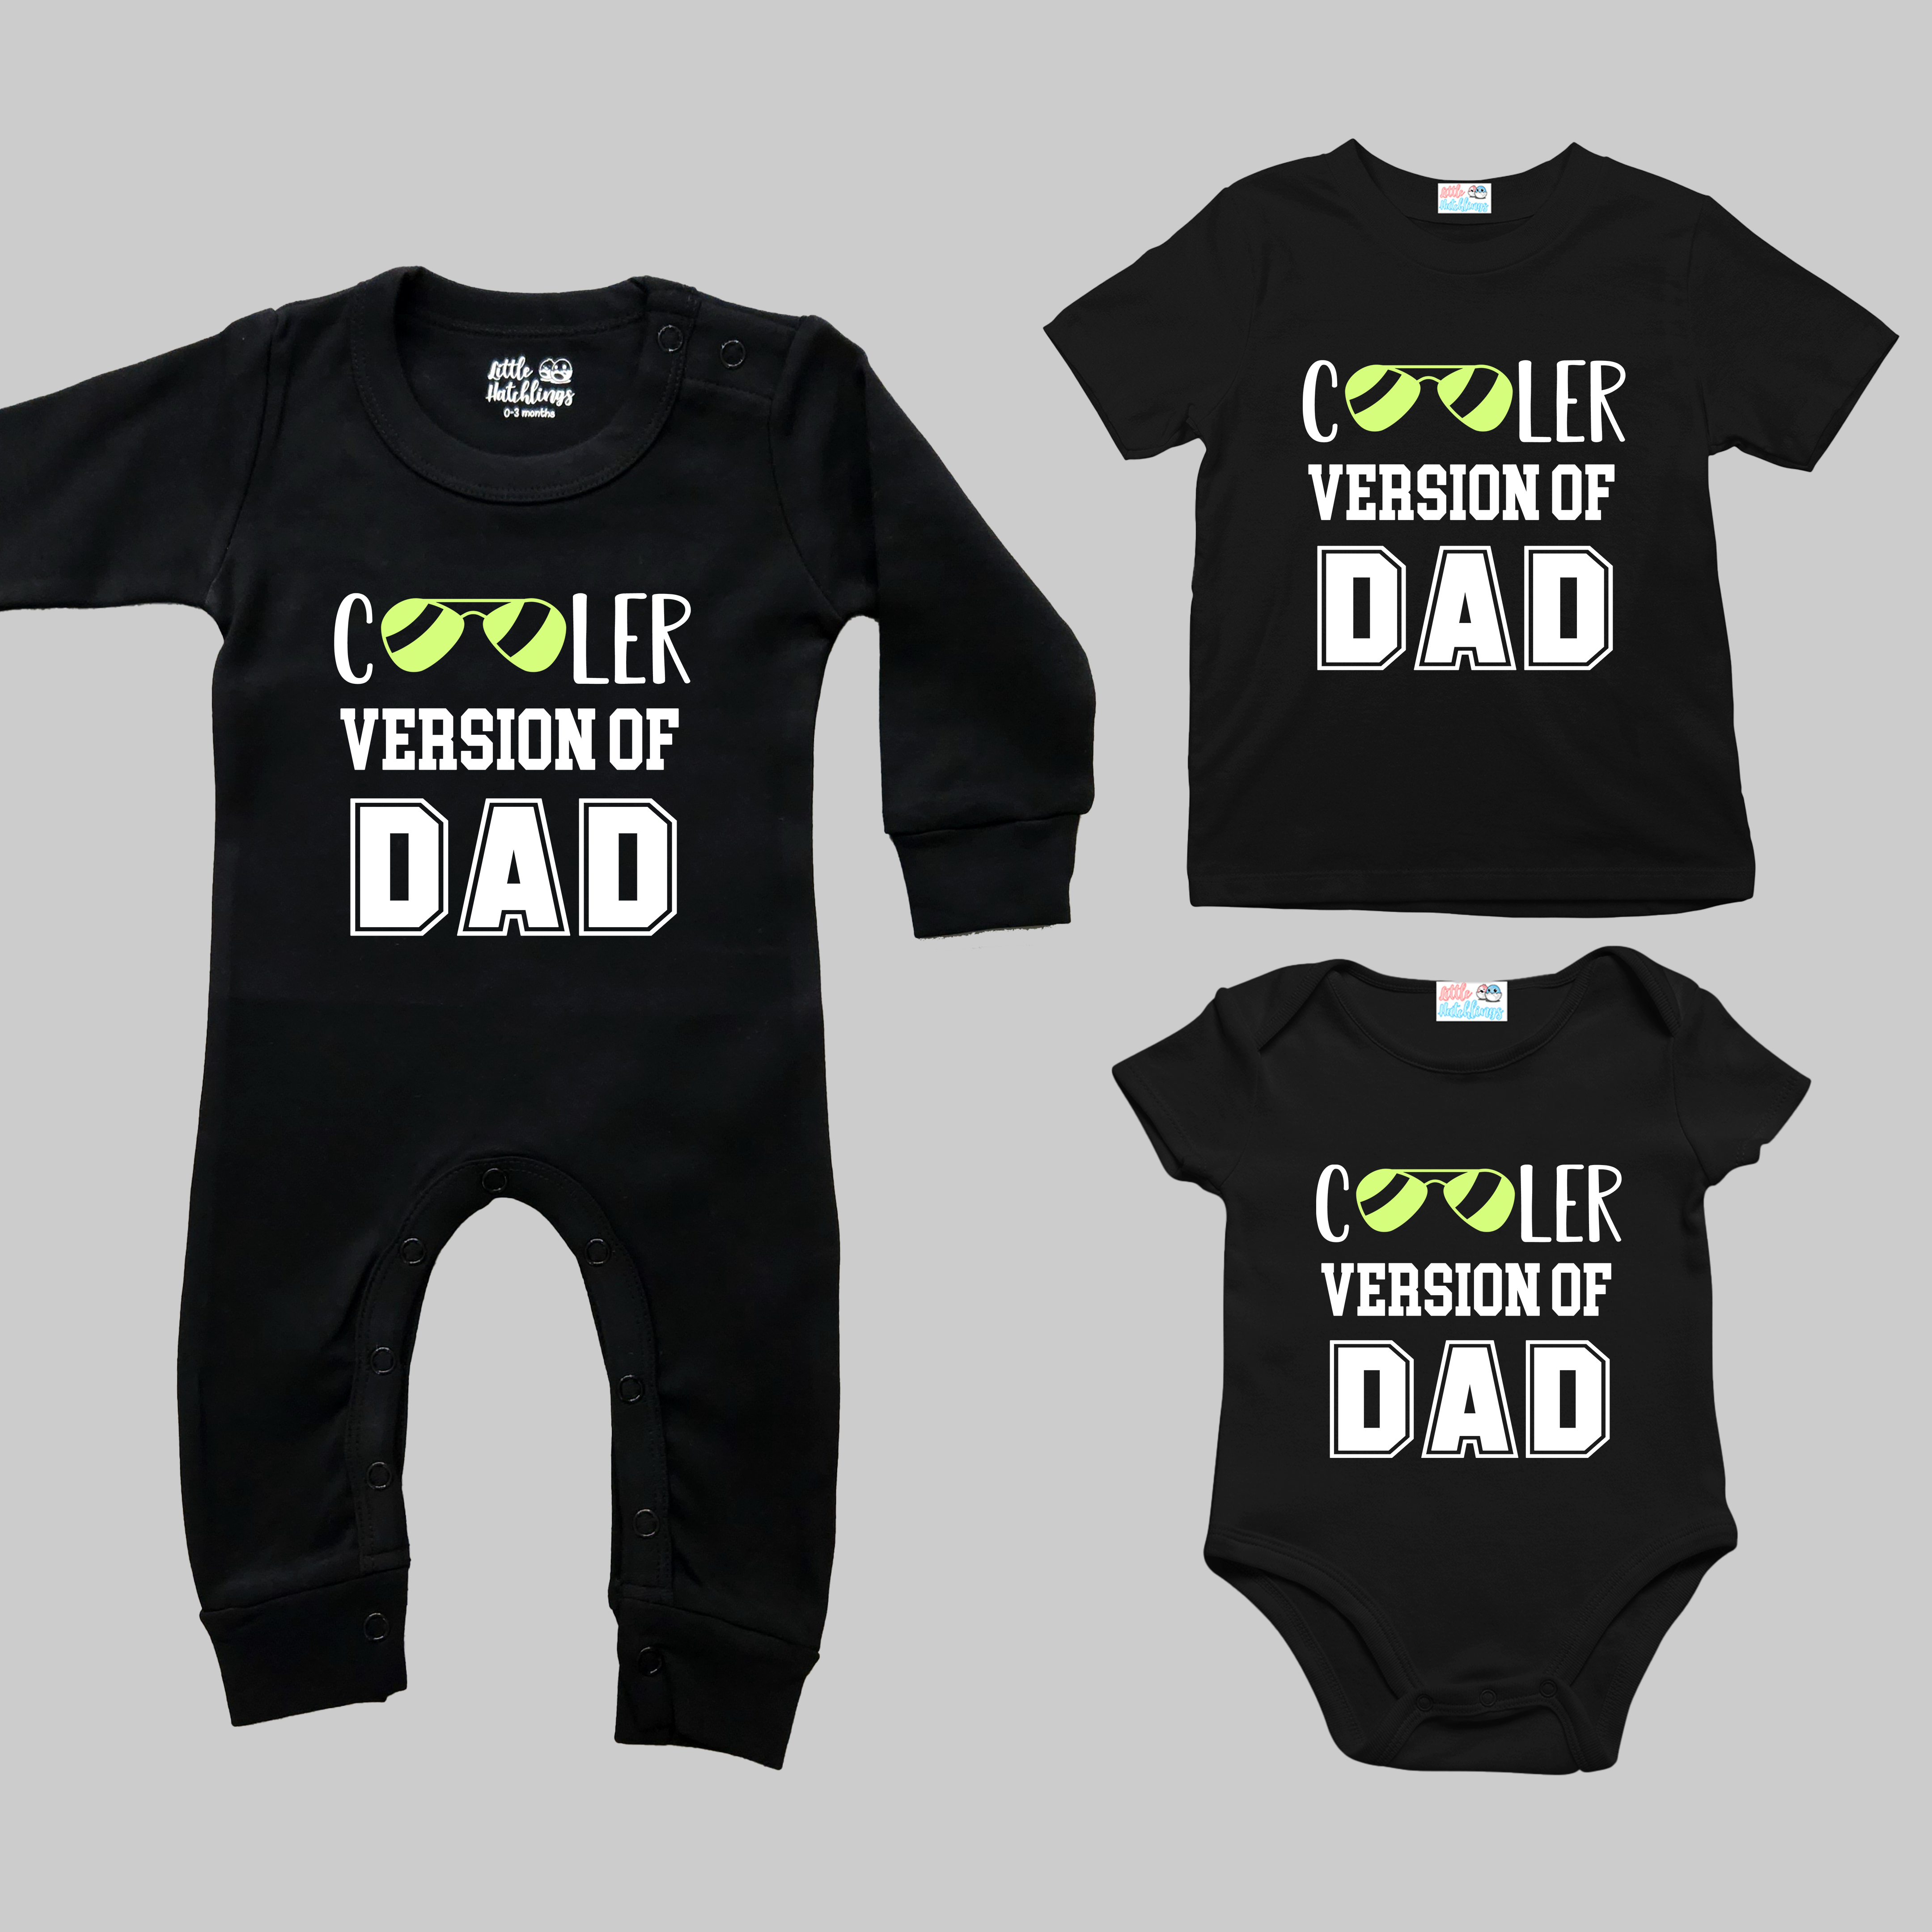 The Cool Dad + Cooler Version Of Dad Black Combo - Adult Tshirt + Kids Tshirt